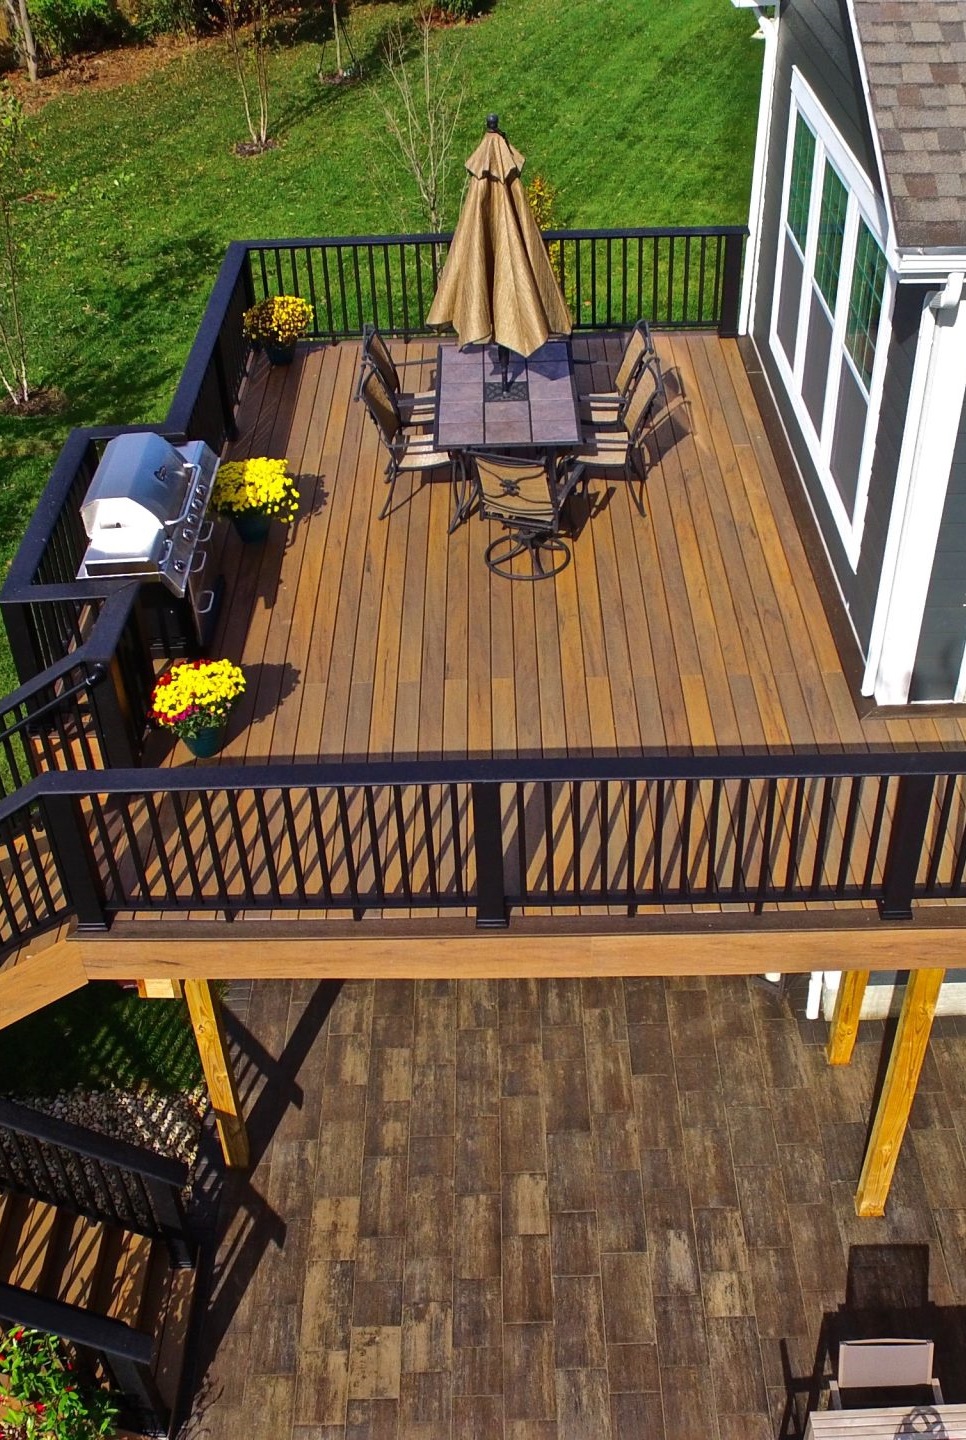 Upstairs deck with grill and dining setup overlooking lawn